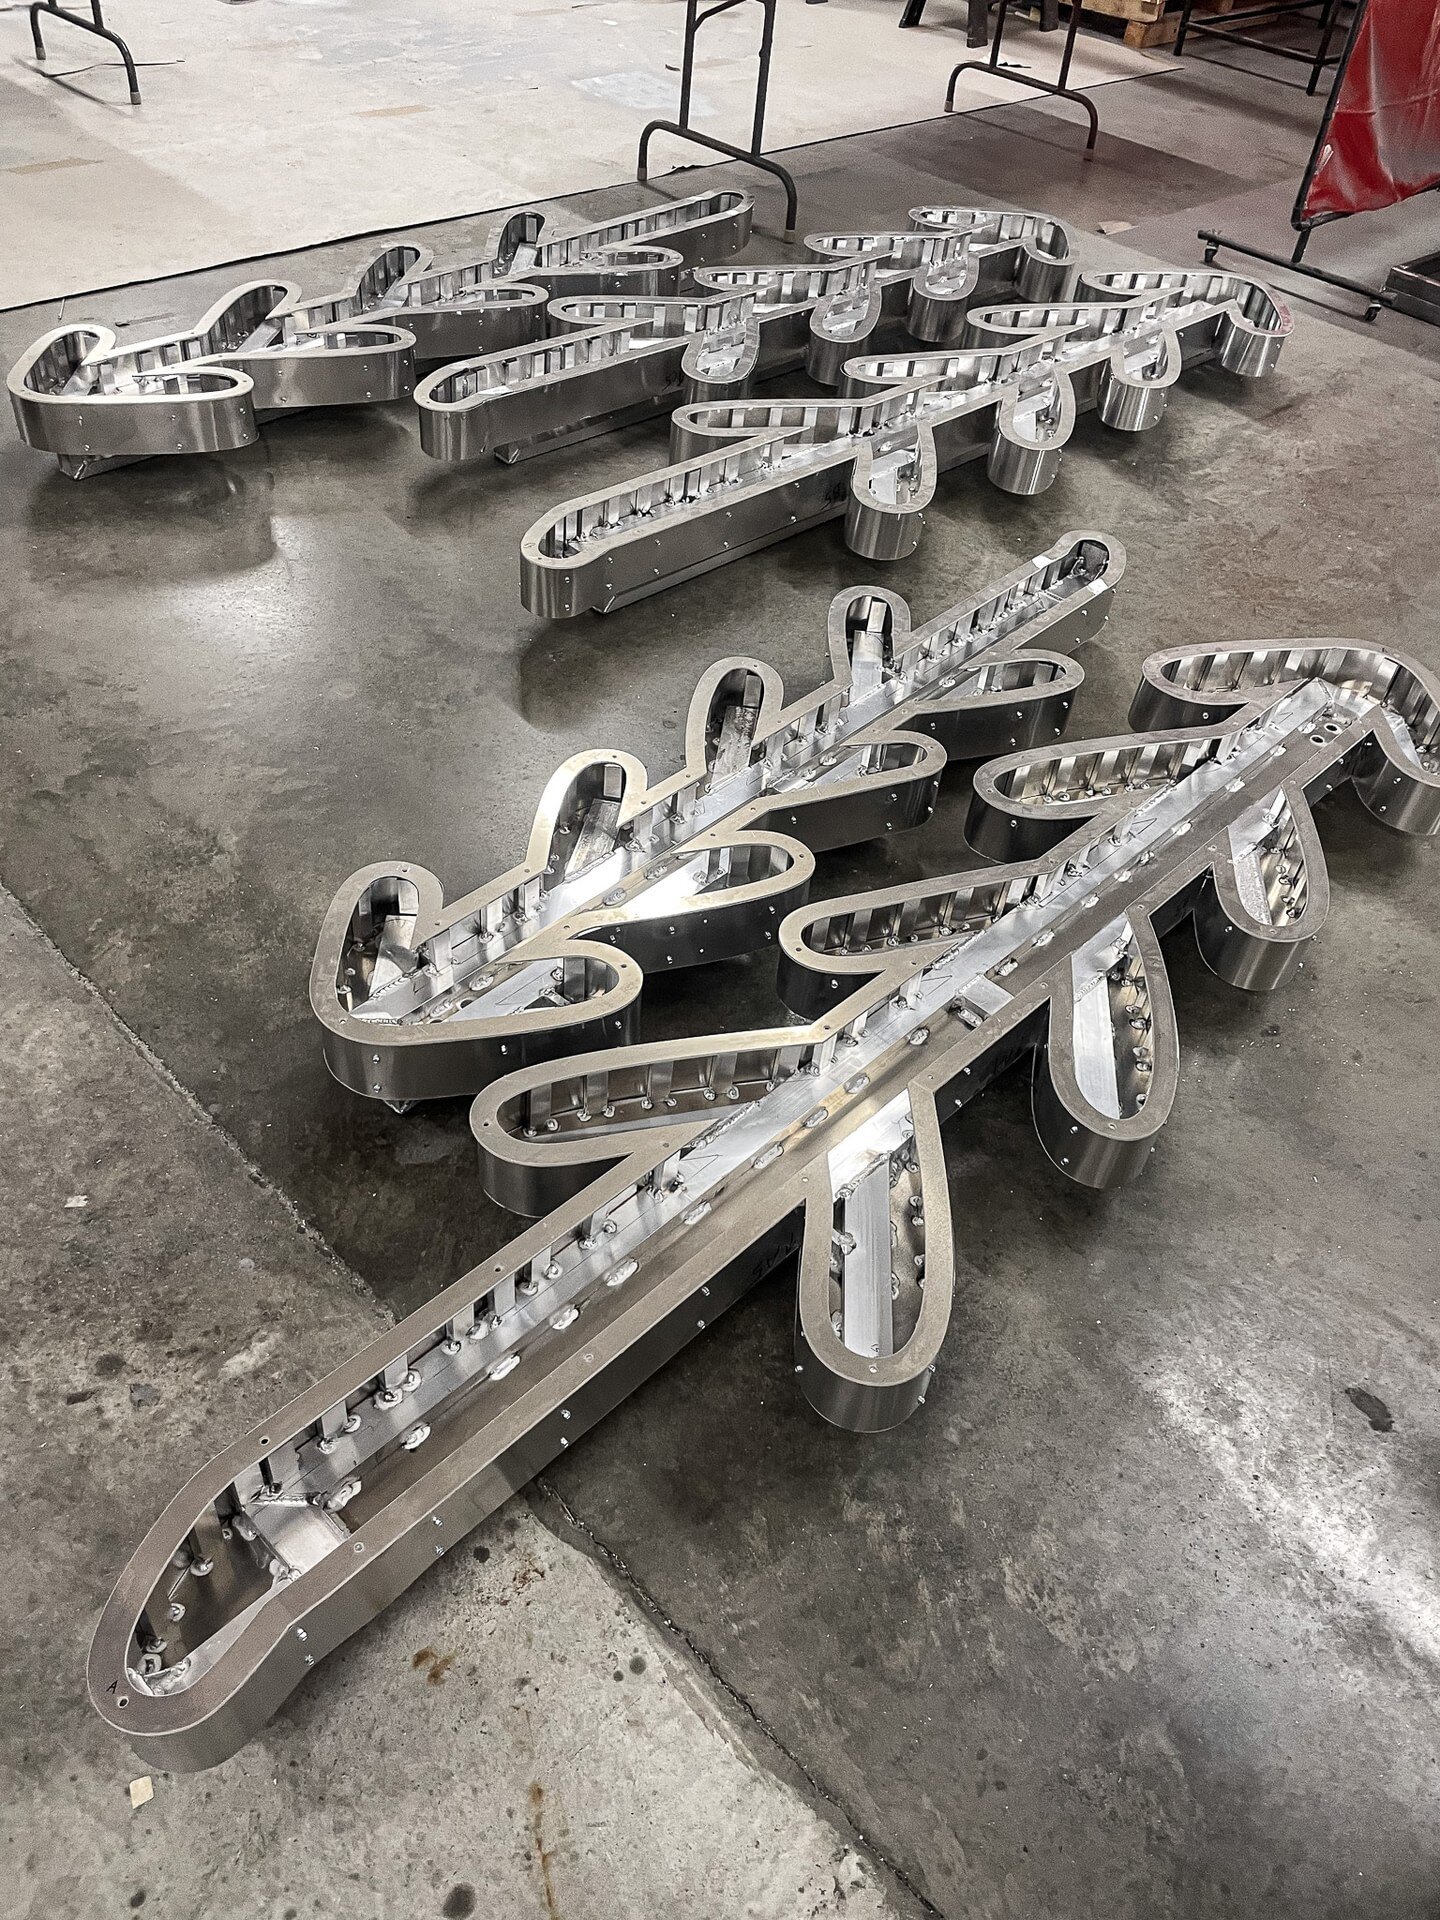 This was quite the aluminum project in metalworking! Working structure into an organic logo was challenging, but these looked so cool before paint.